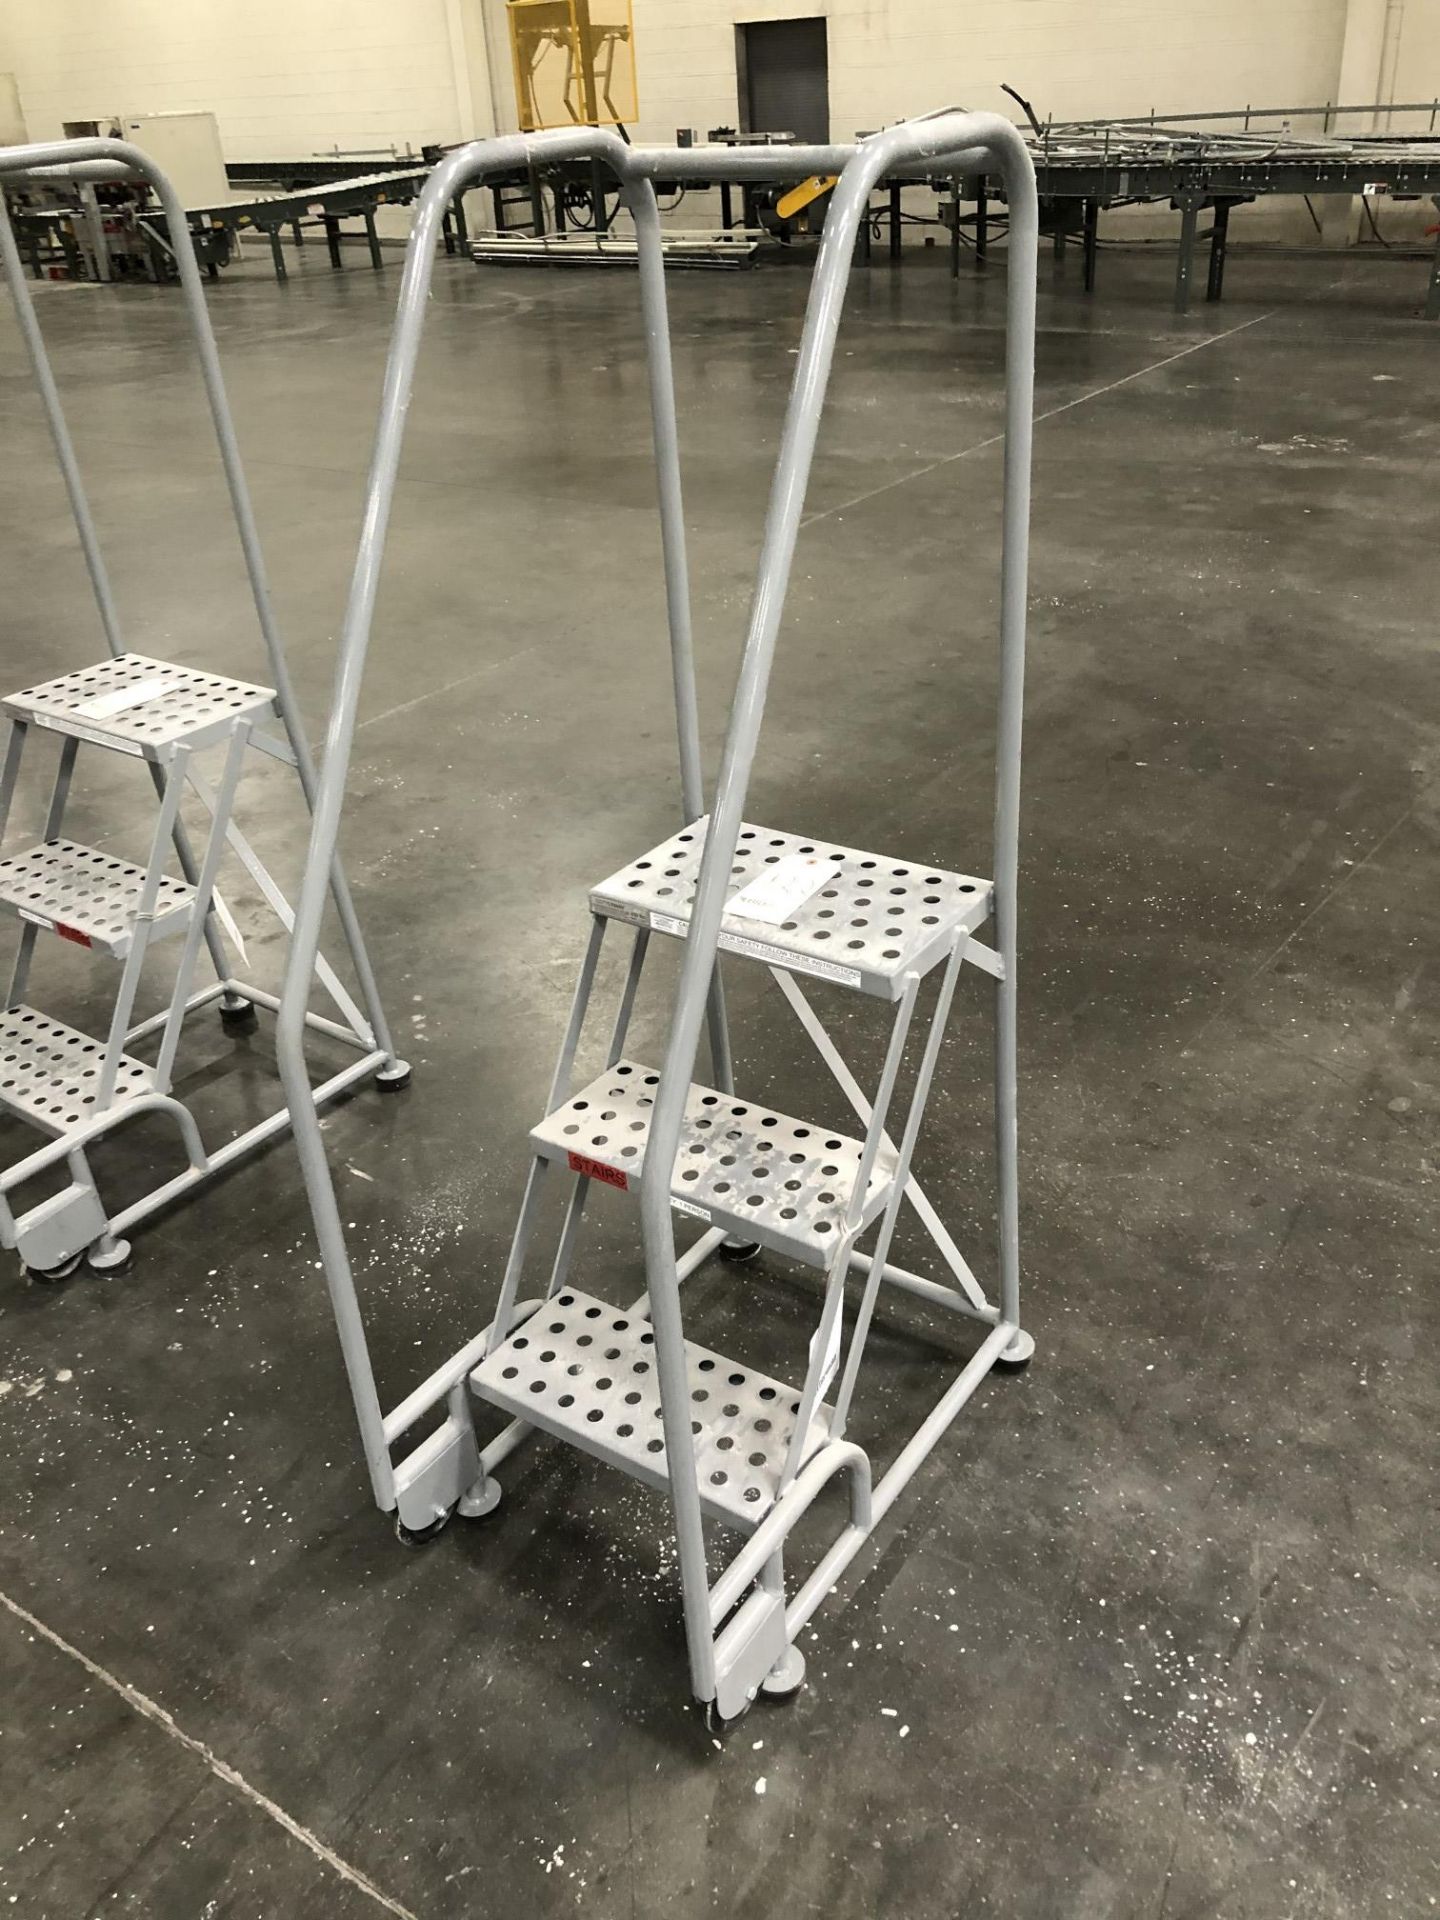 Cotterman 3-Step Rolling Ladder, Max Load: 450 Lbs - Image 2 of 3